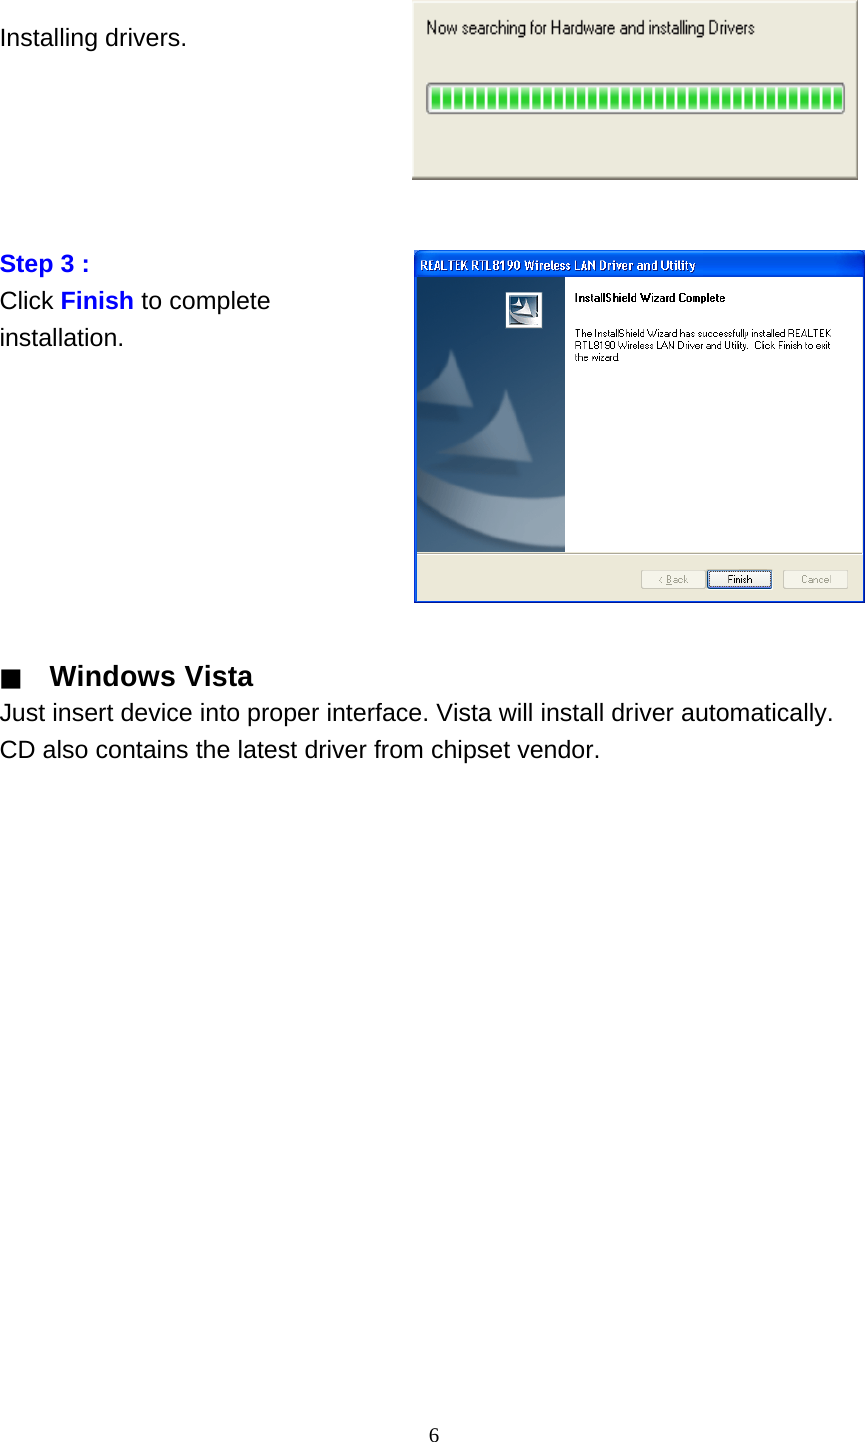 6     Installing drivers.          Step 3 : Click Finish to complete installation.                ▓ Windows Vista Just insert device into proper interface. Vista will install driver automatically. CD also contains the latest driver from chipset vendor. 